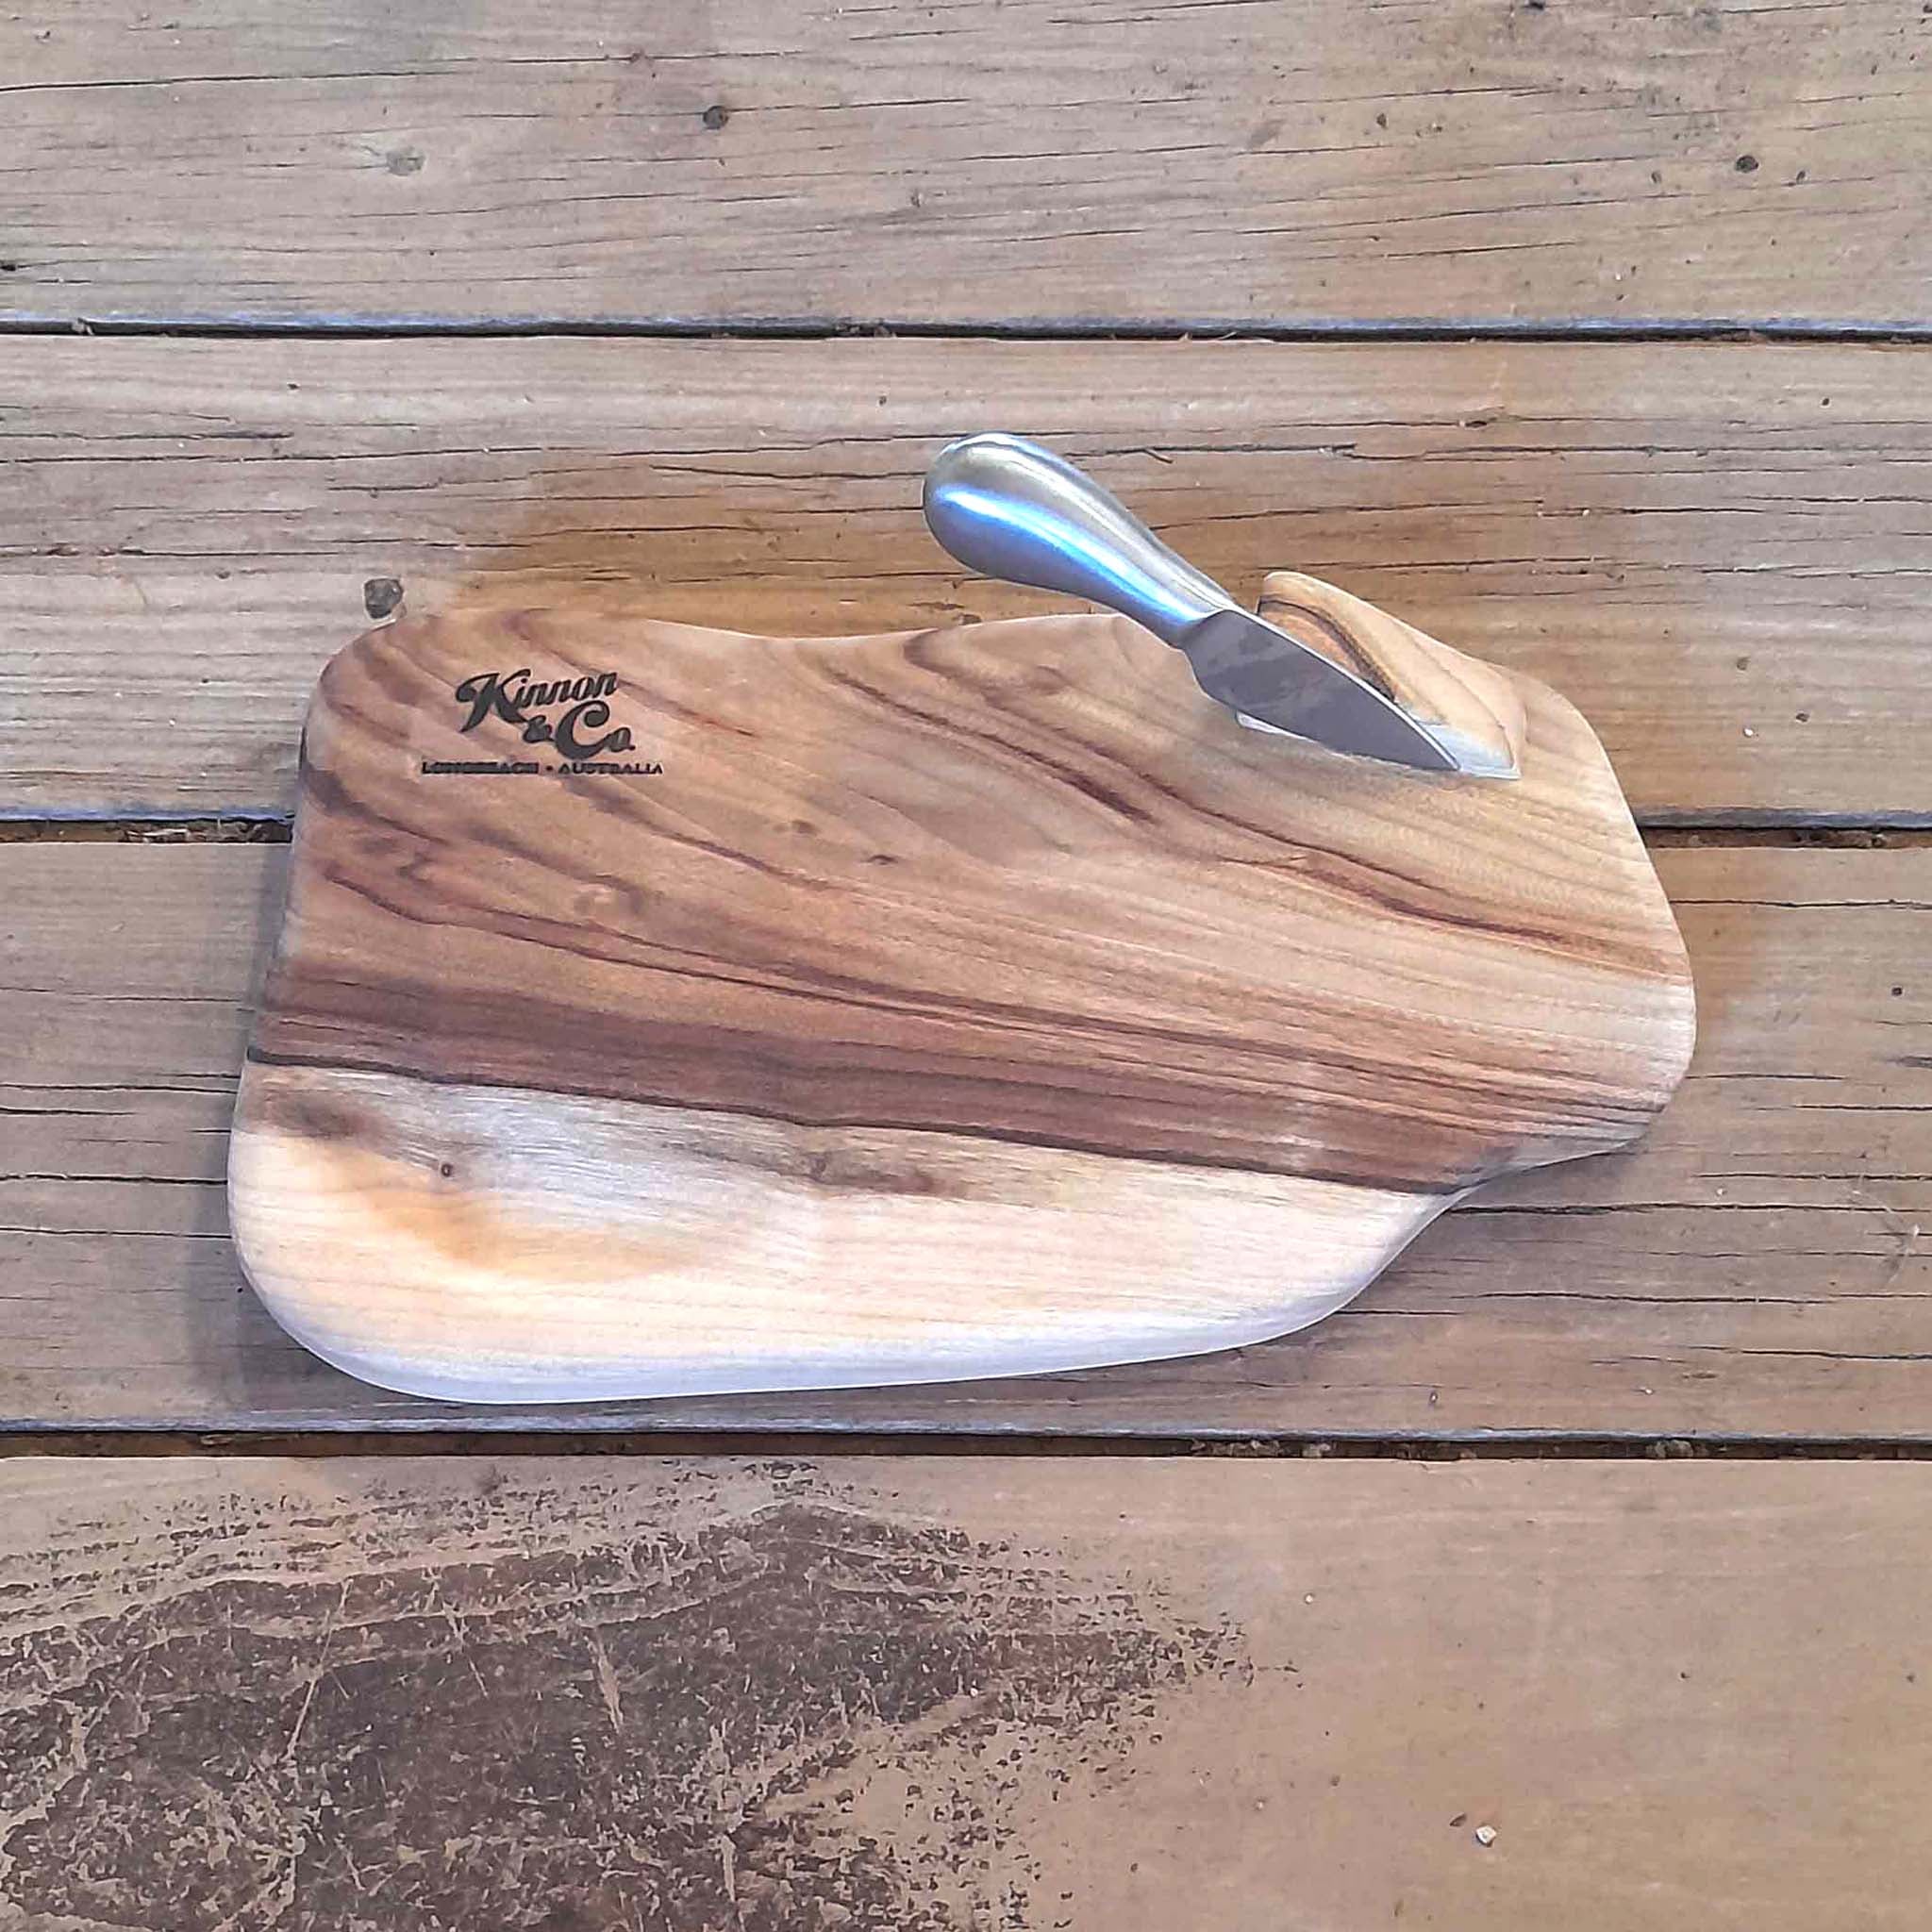 Kinnon and Co branded Camphor Laurel Cheeseboard with one brushed stainless steel knife. 